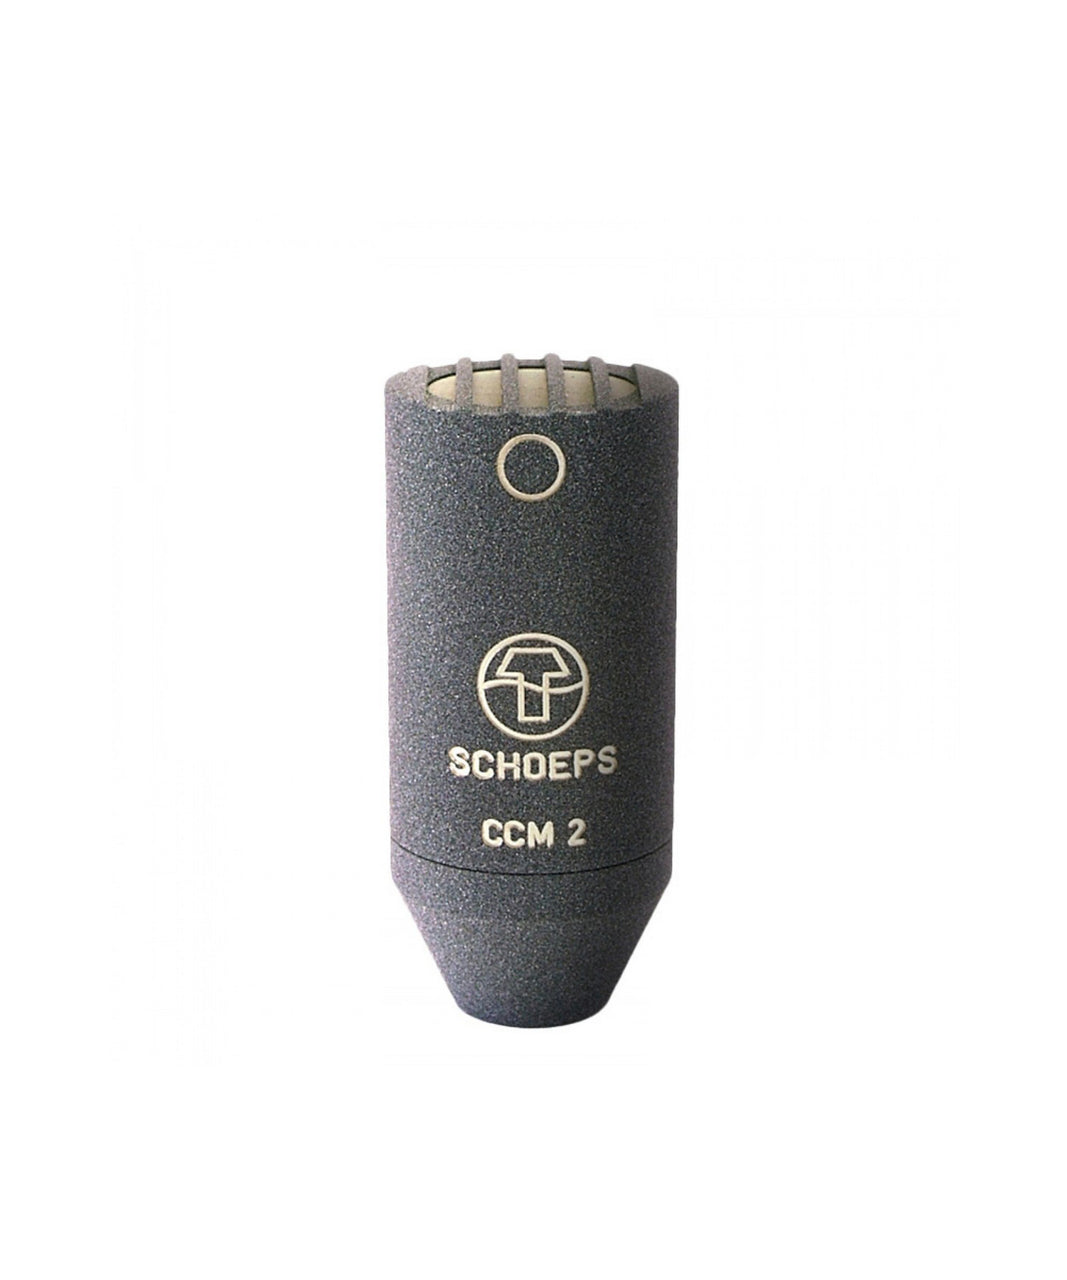 Schoeps CCM 2 Lg Omnidirectional Compact Condenser Microphone with Flat Frequency Response | Matte Black